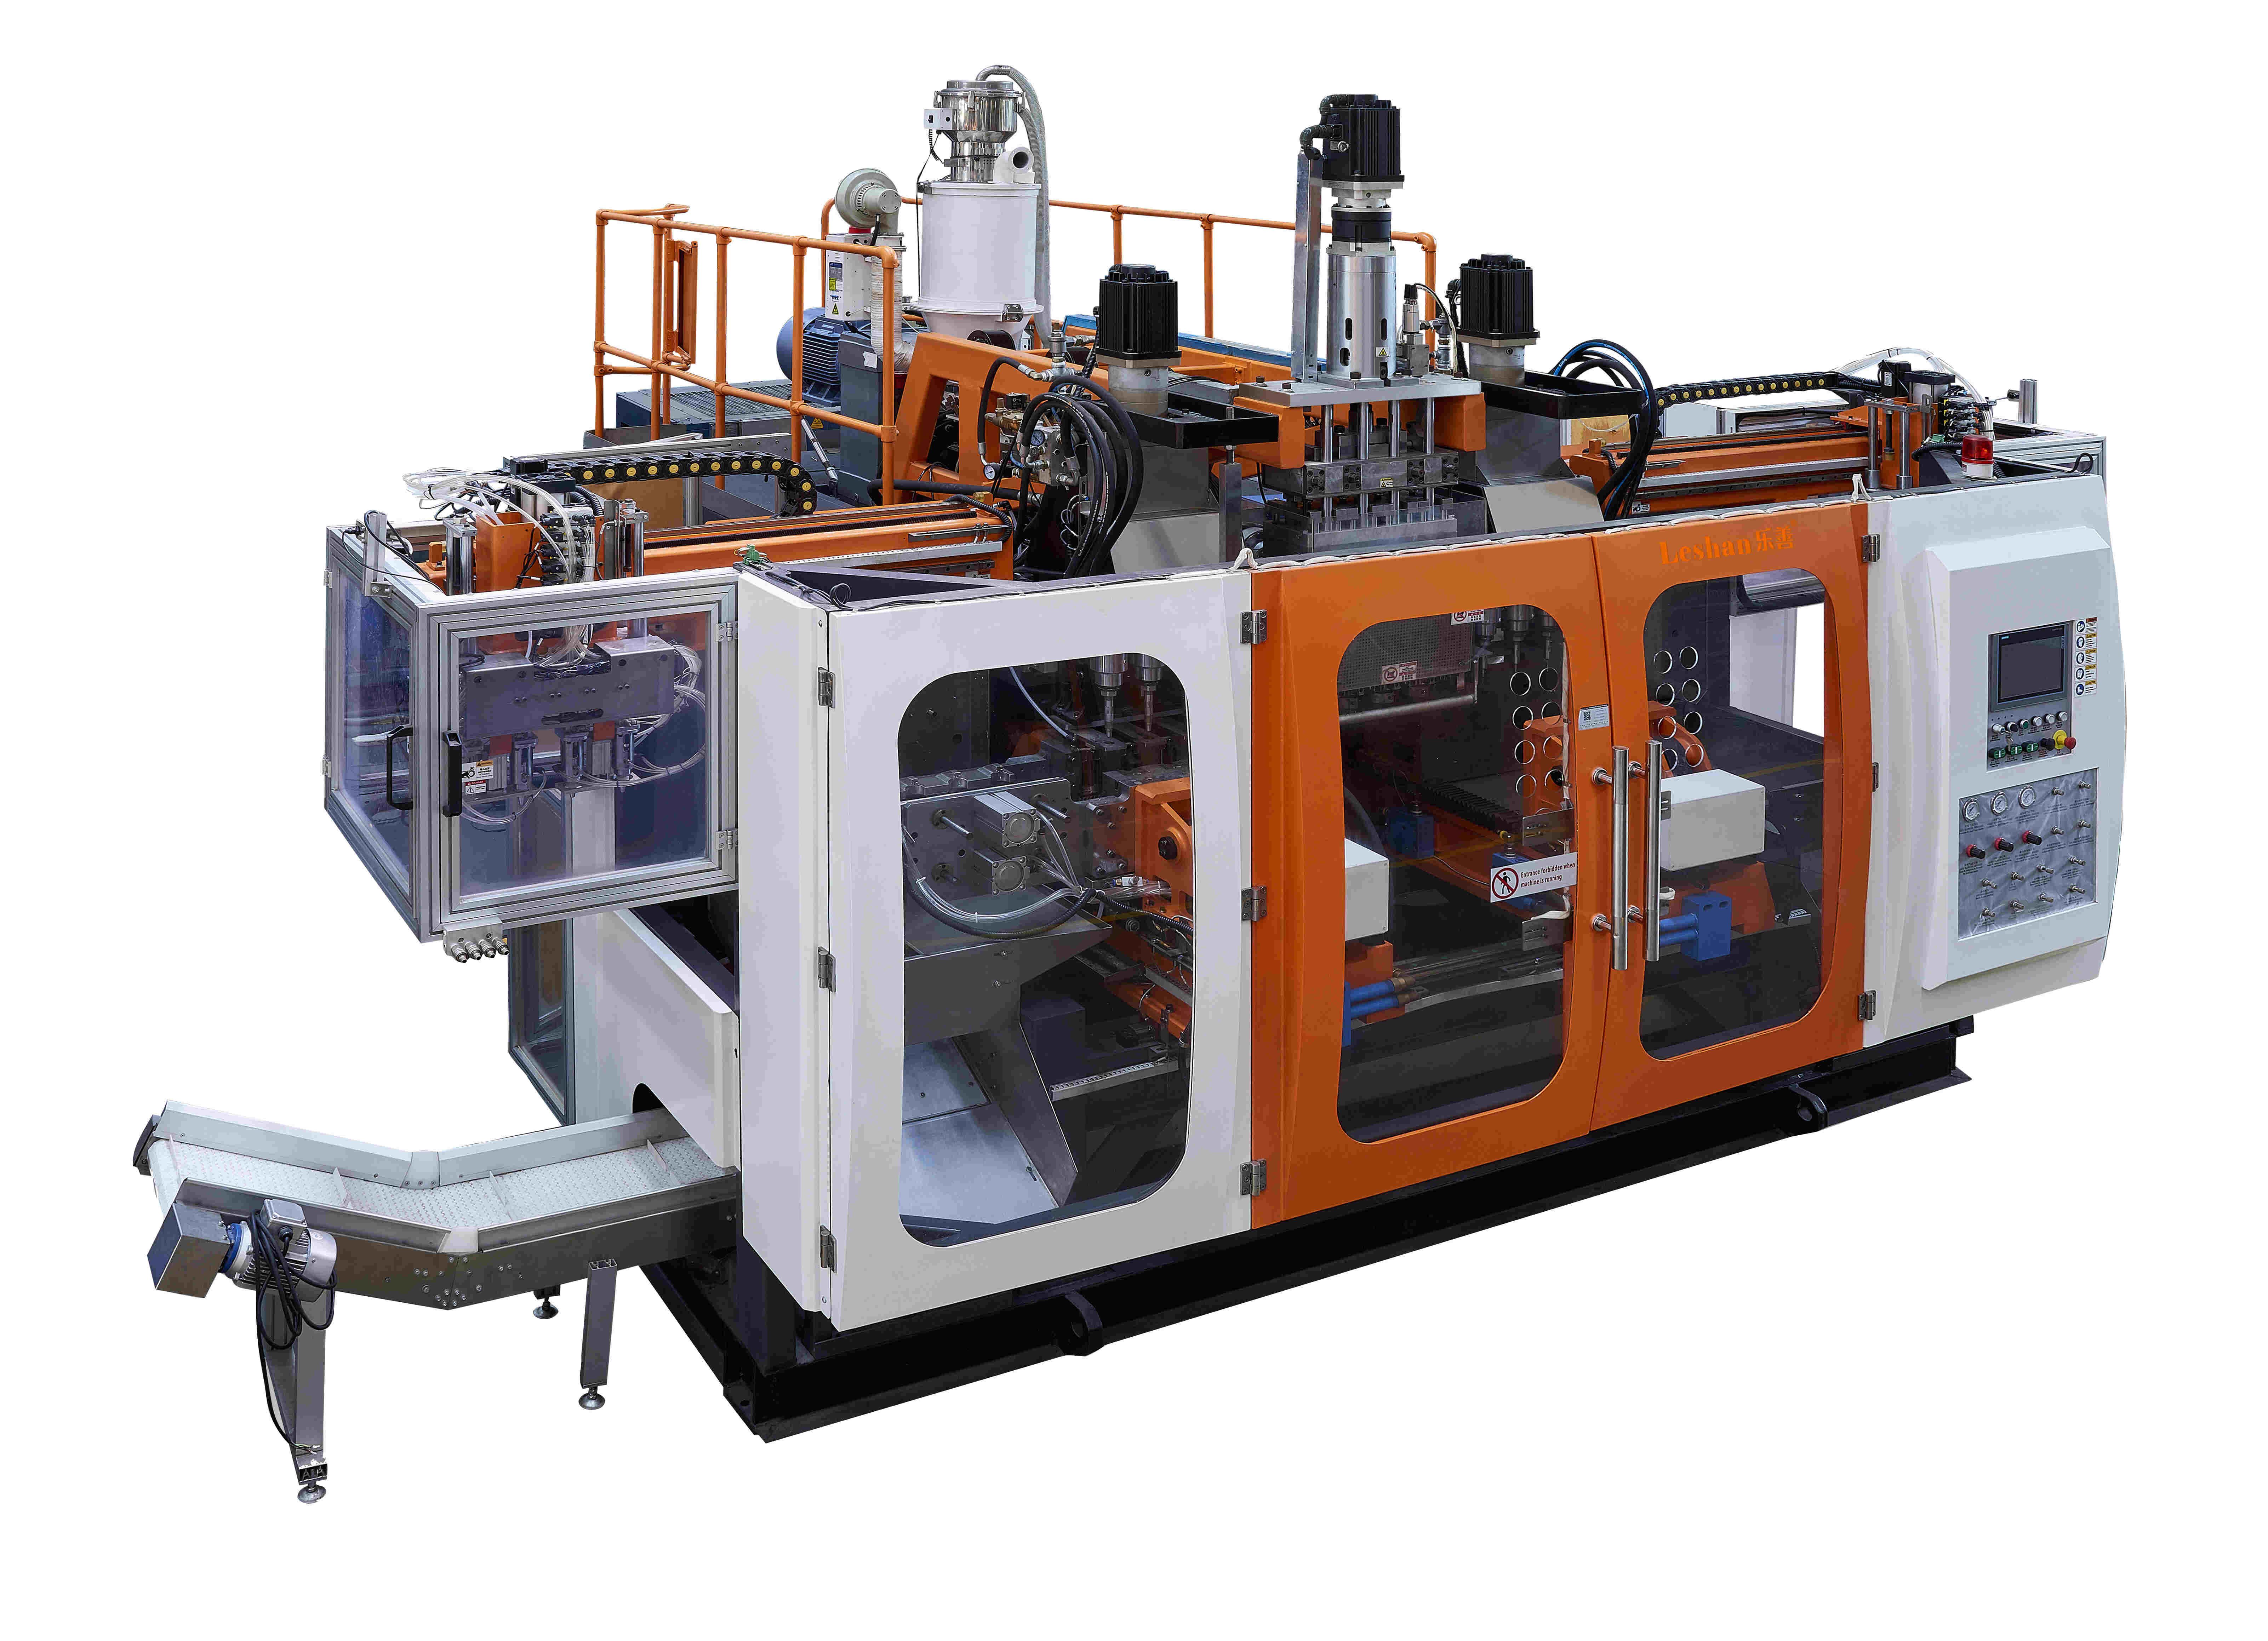 What are the advantages of Leshan blow molding machine?